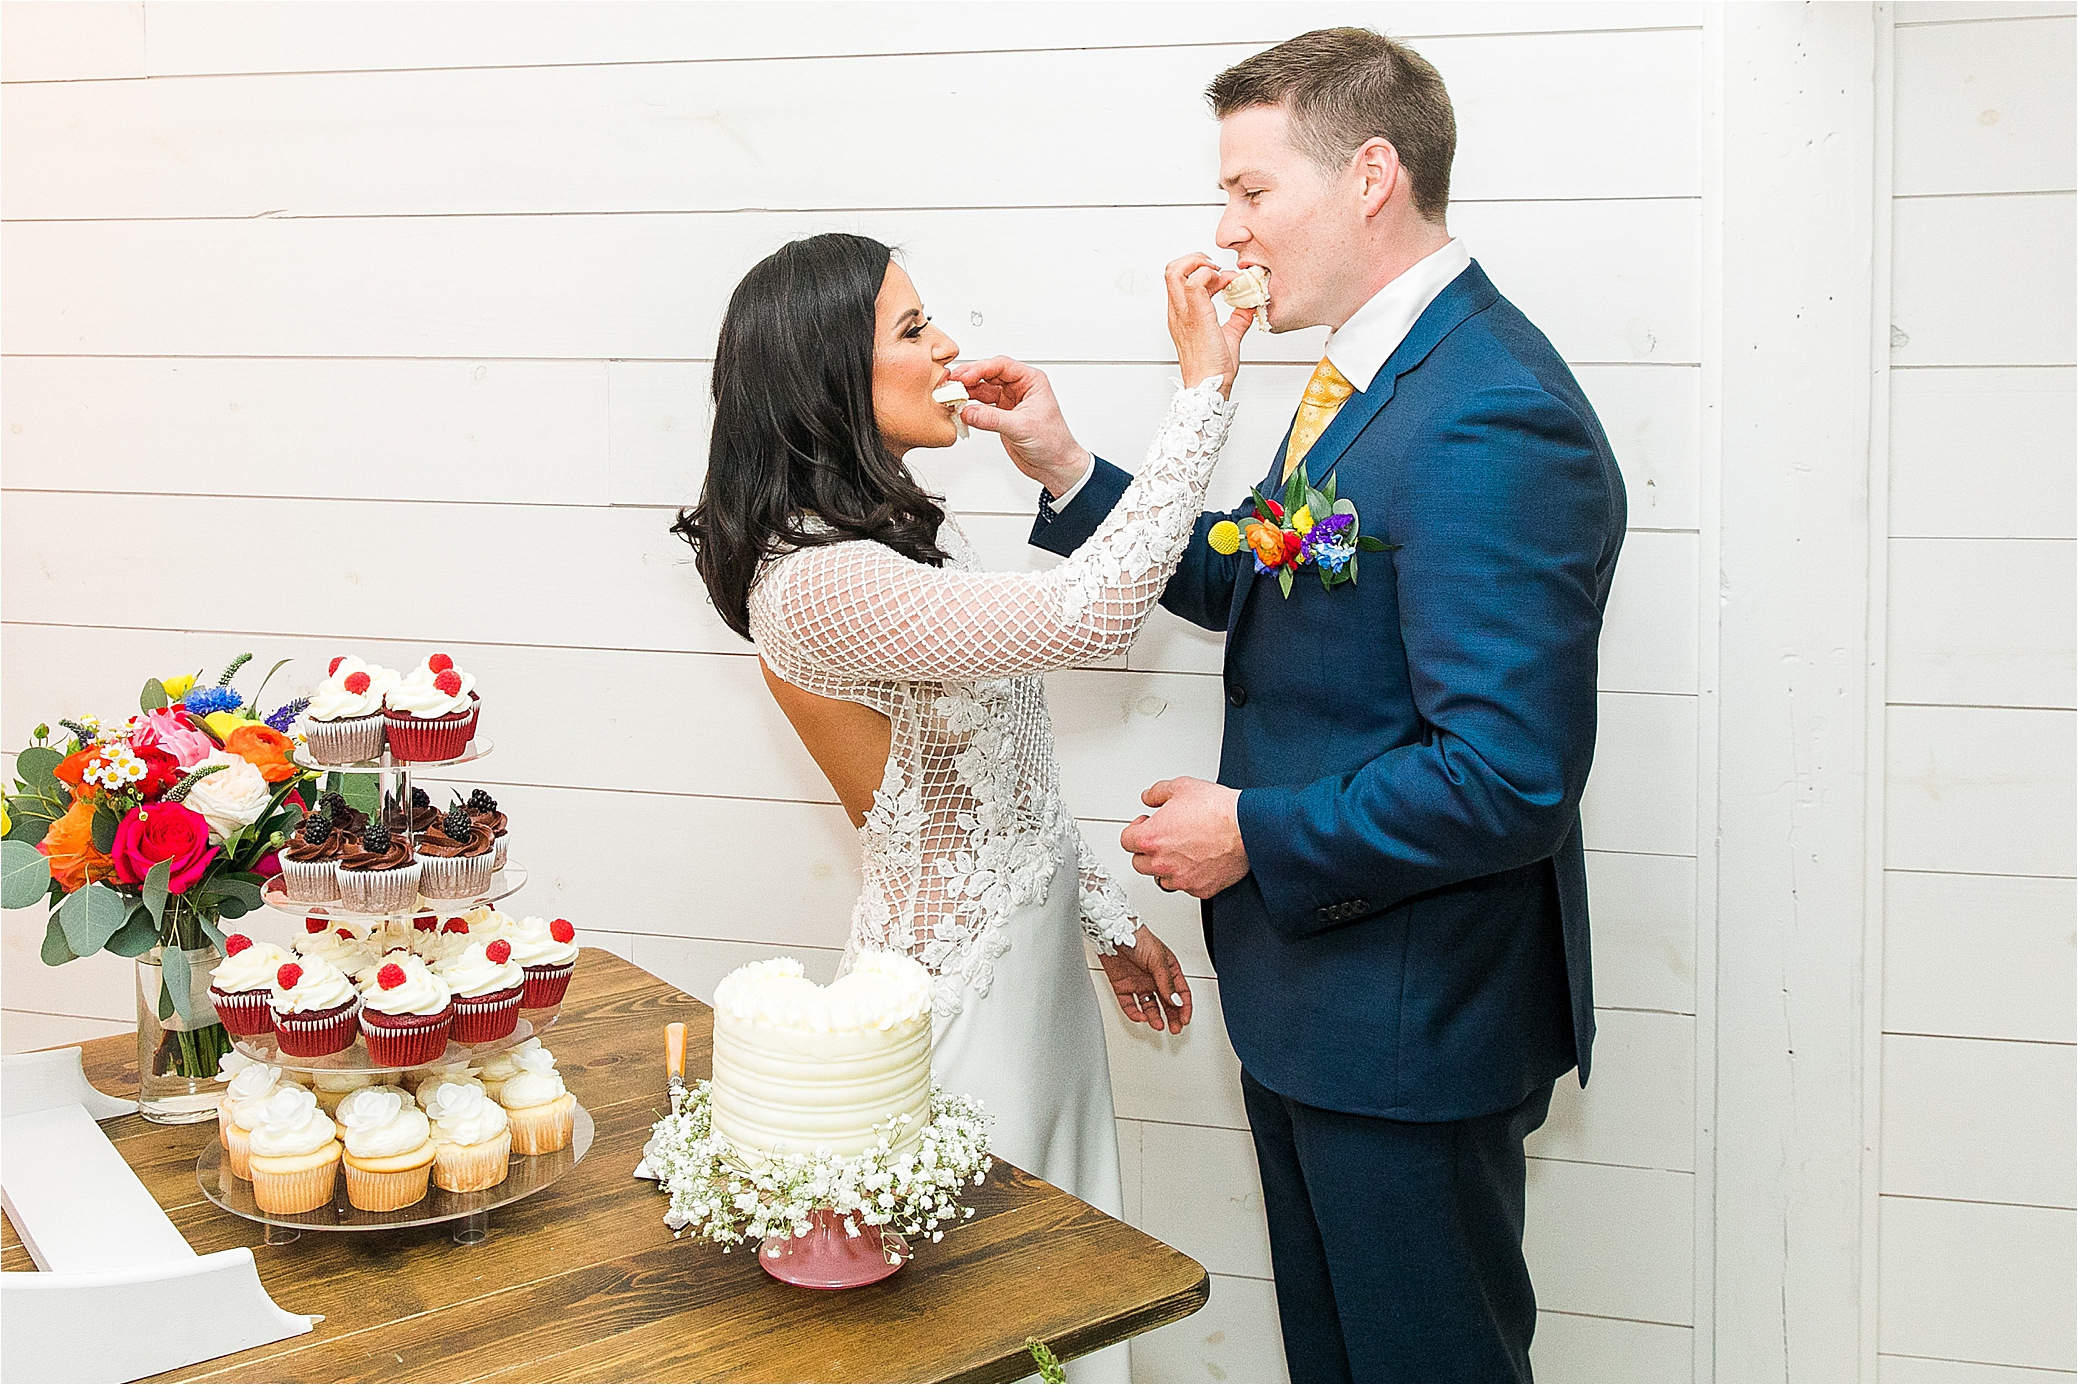 A just married couple feeds each other cake on their wedding day at Pineway Farms in East Texas